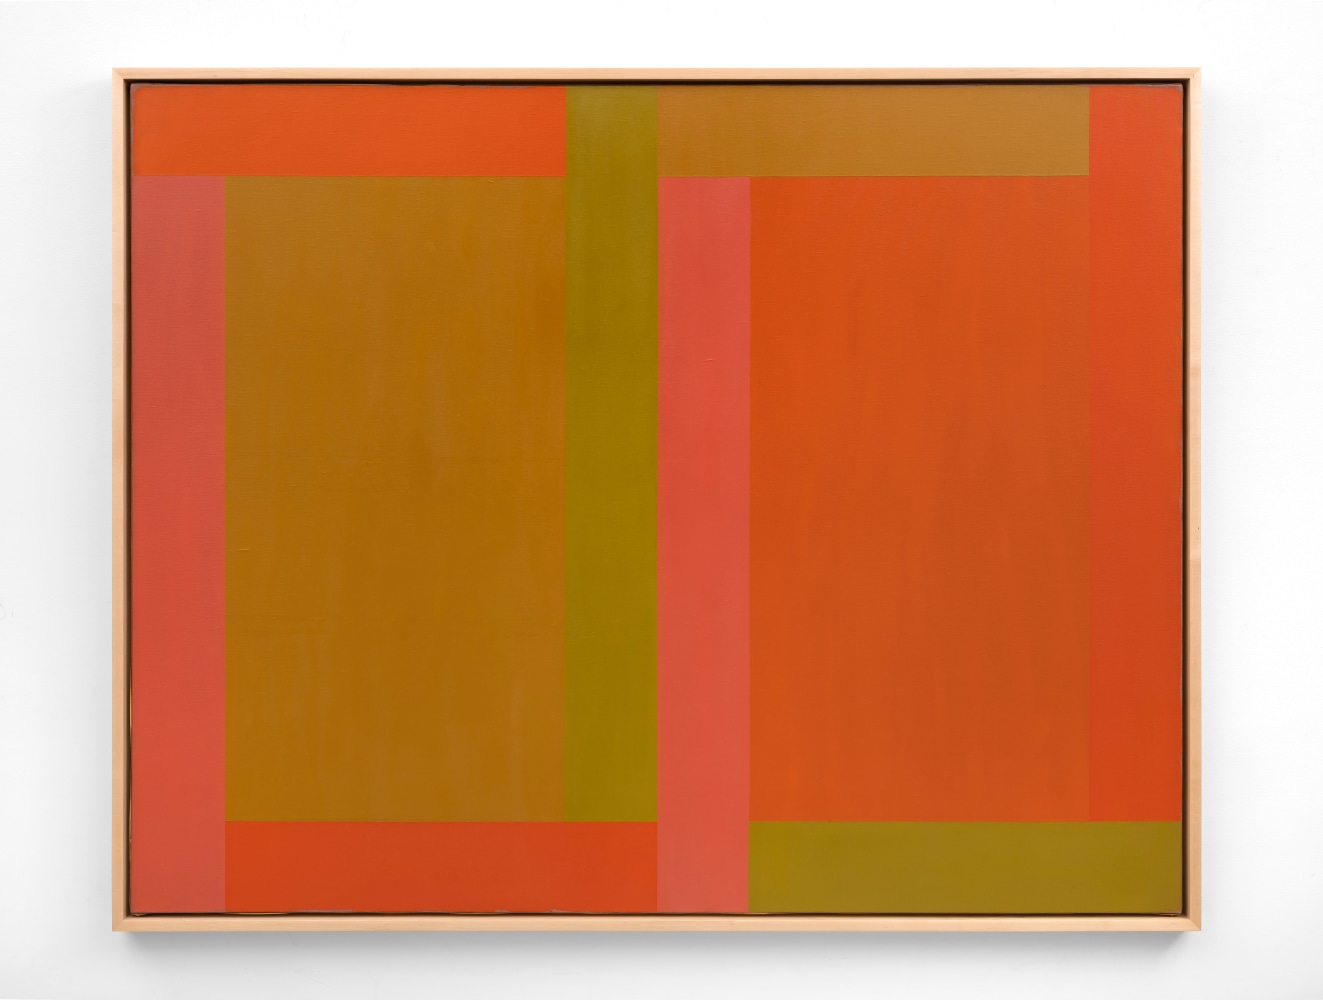 Mate, 1978-79  mixed media on canvas  54 x 68 inches; 137.2 x 172.7 centimeters  LSFA# 13270